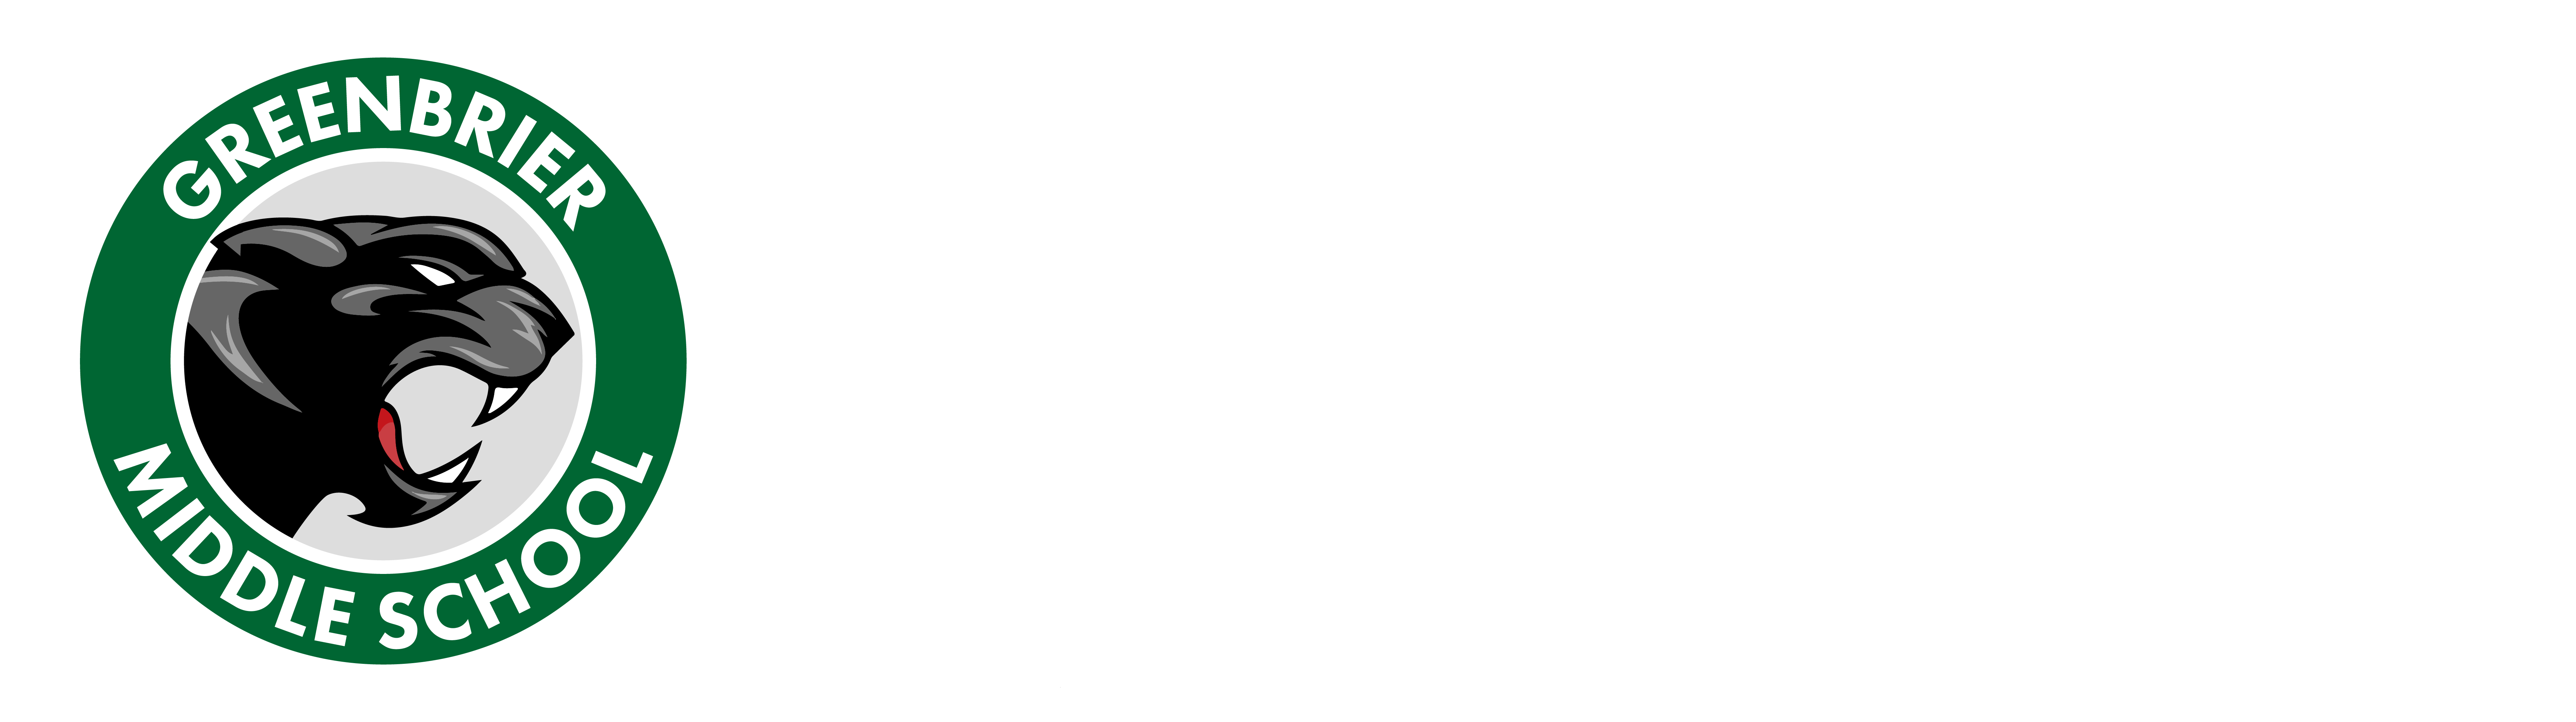 Greenbrier Middle